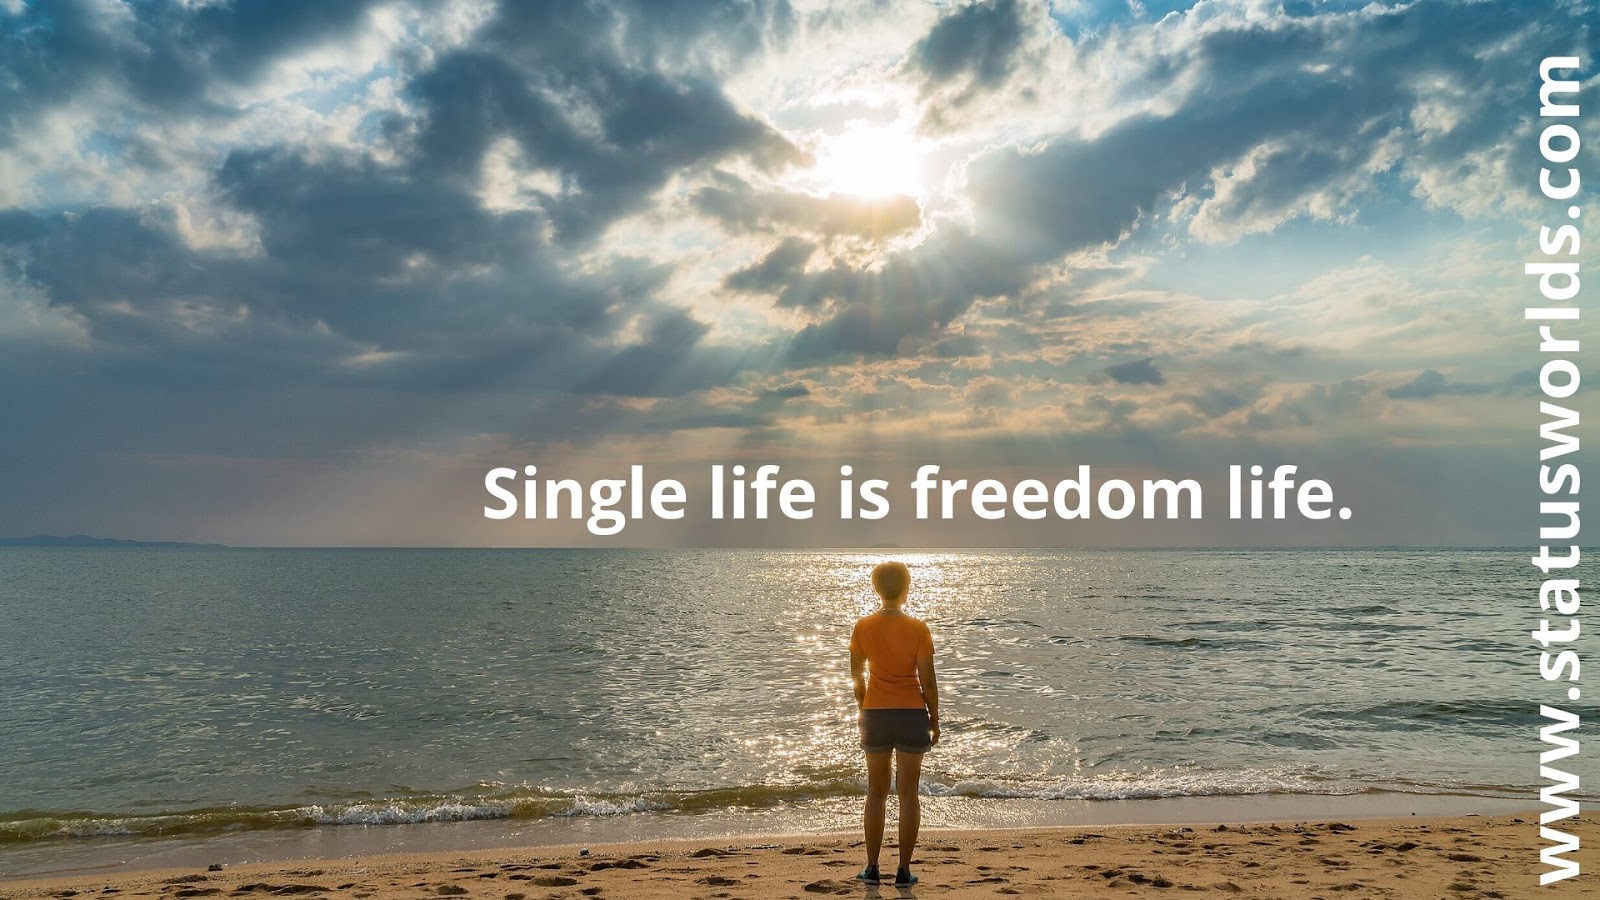 Latest] Being Single Status & Quotes For Single People - Status World